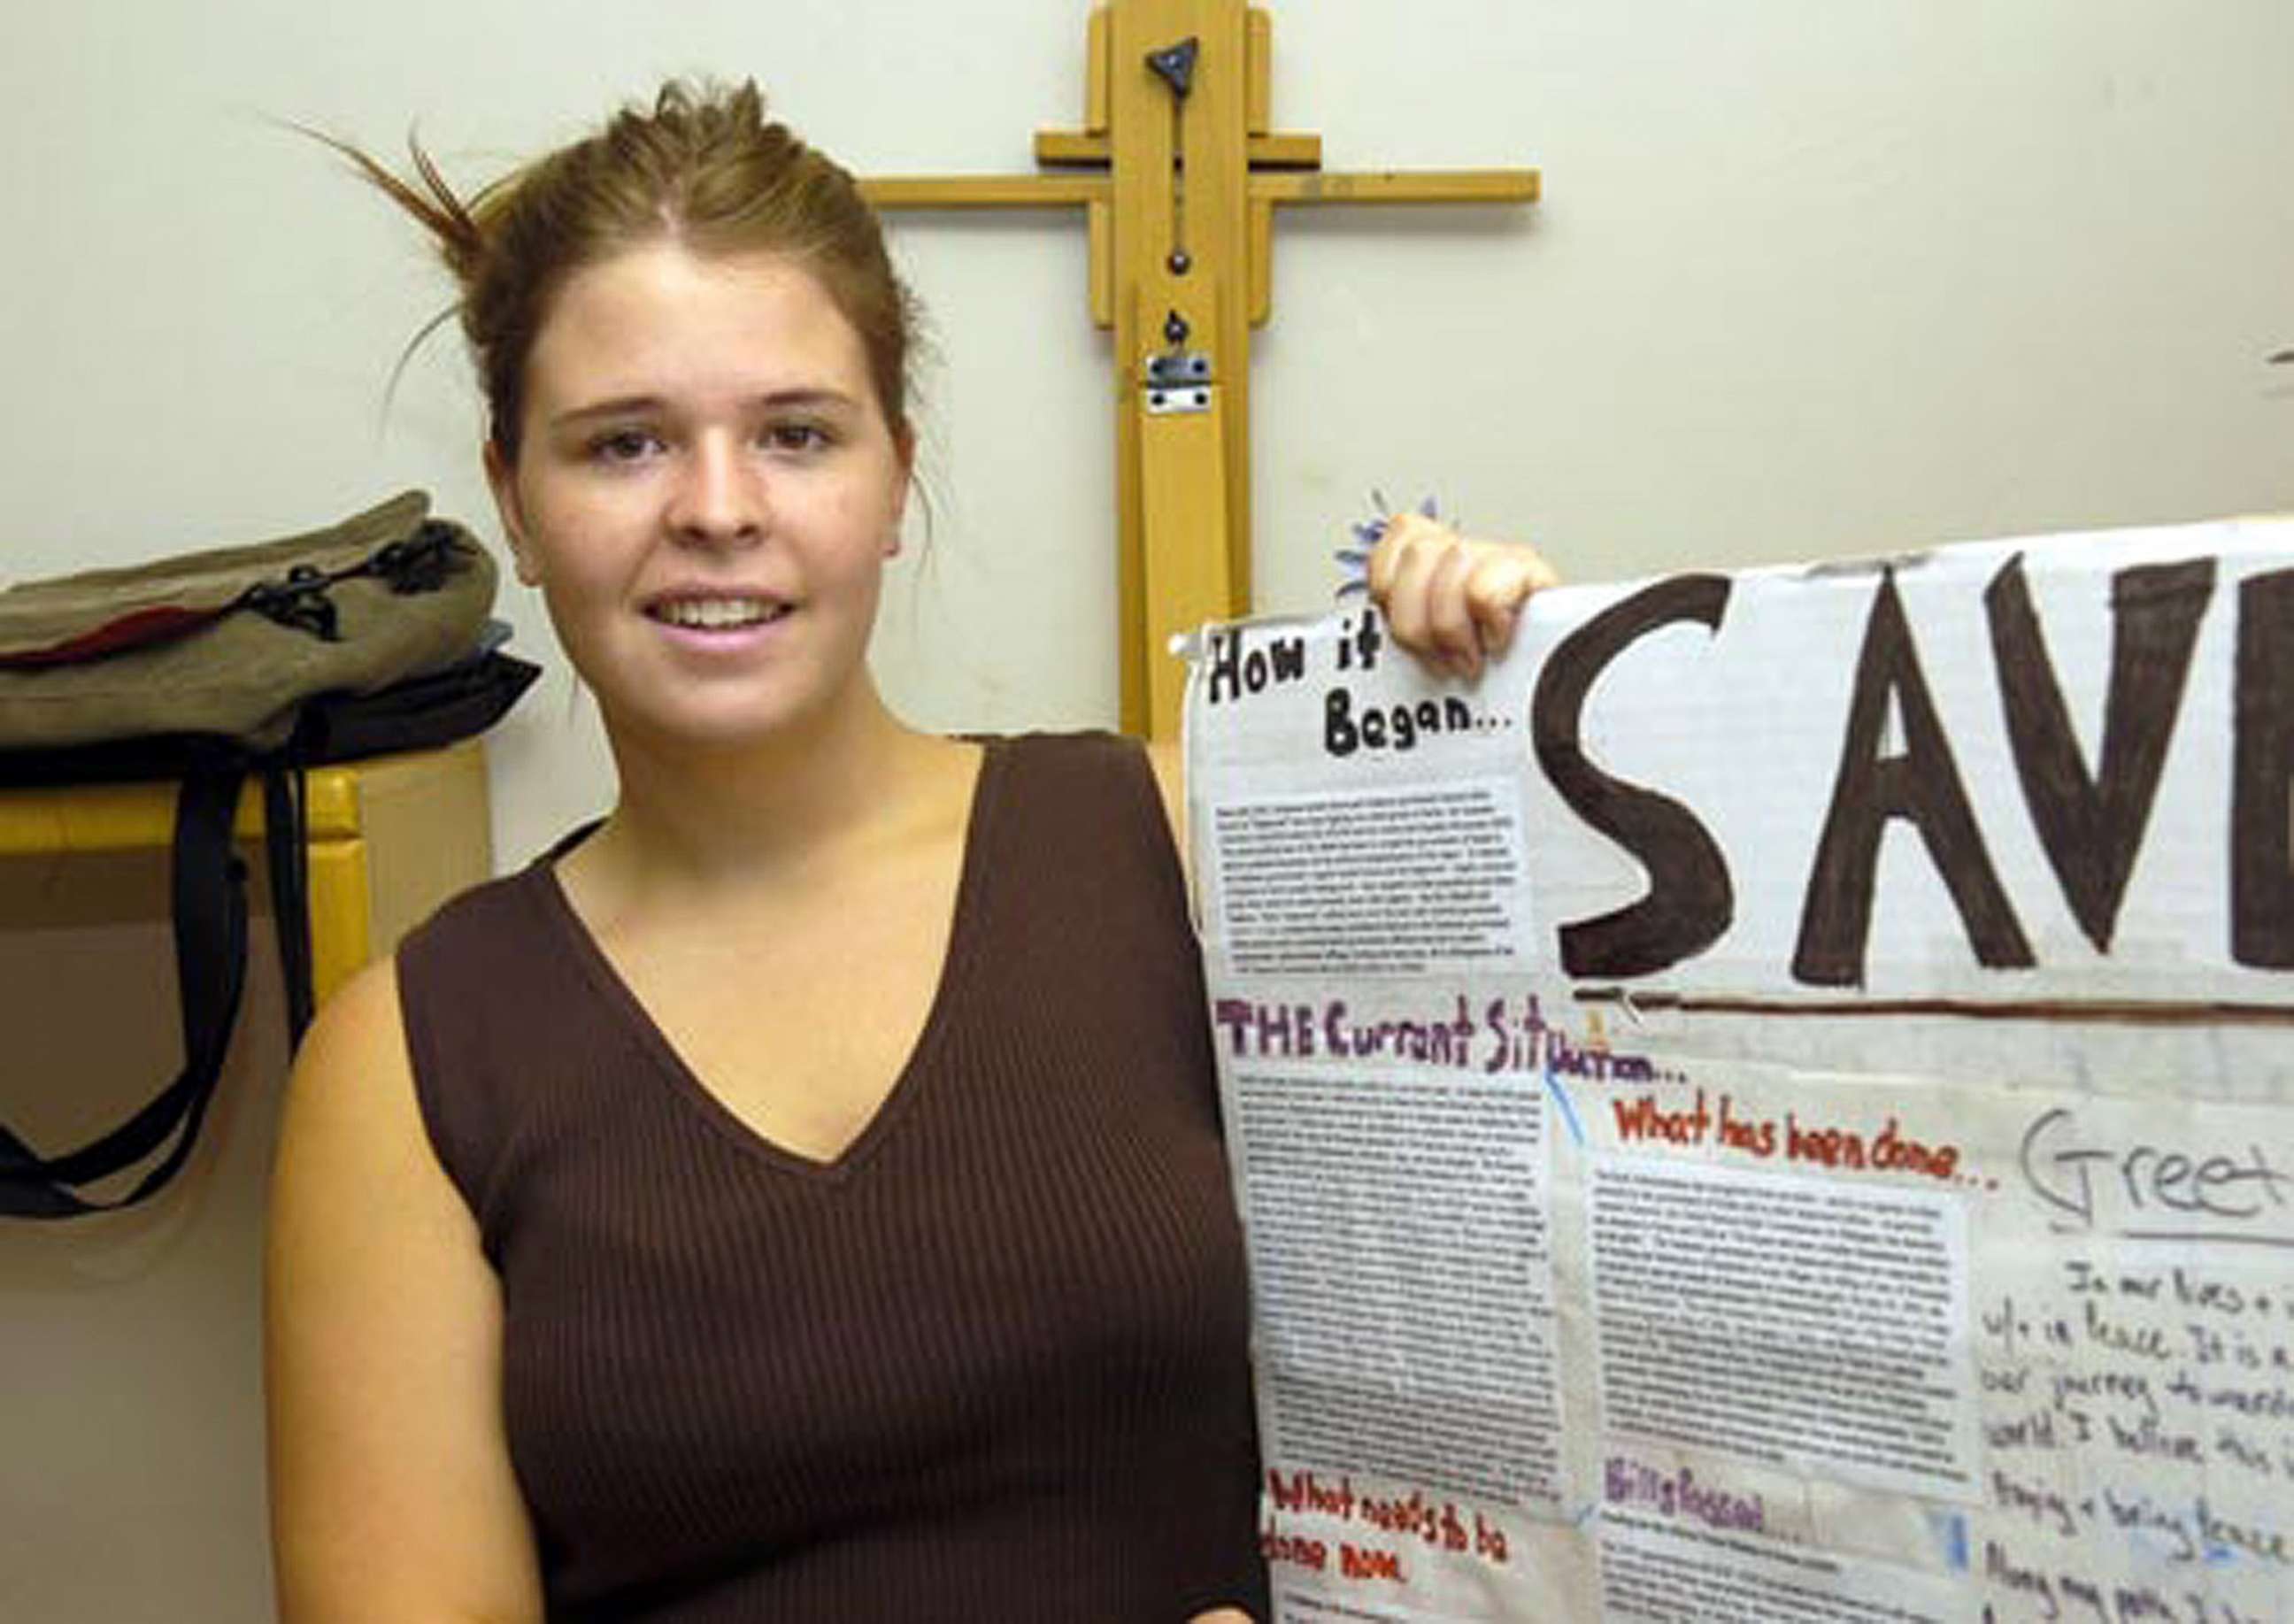 PHOTO: Kayla Mueller is shown after speaking to a group in Prescott, Ariz., May 30, 2013.